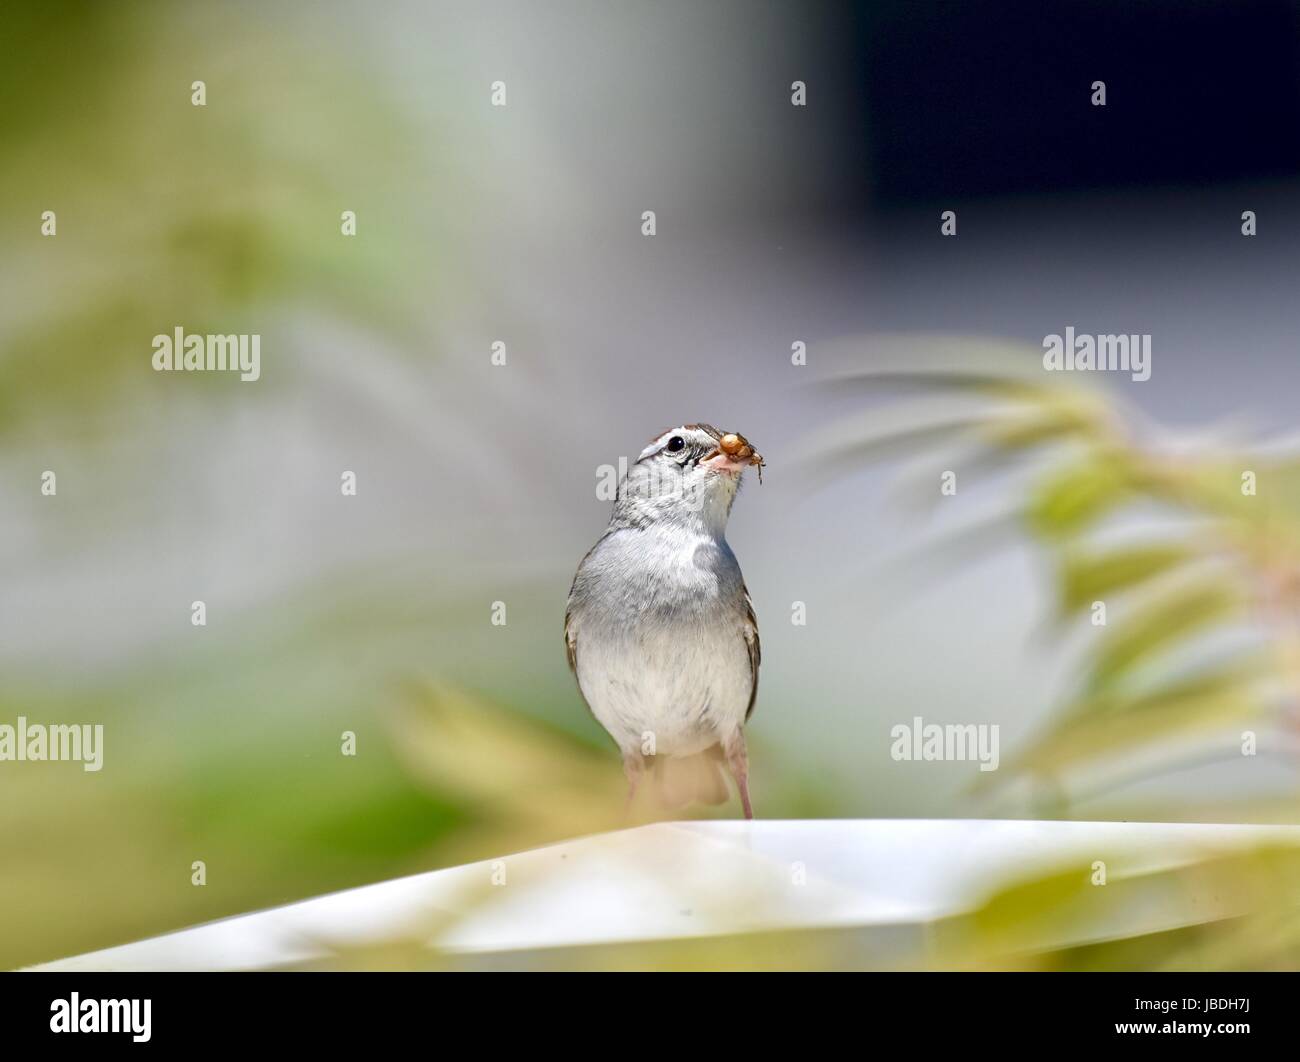 Juvenile chipping sparrow (Spizella passerina) eating an insect Stock Photo